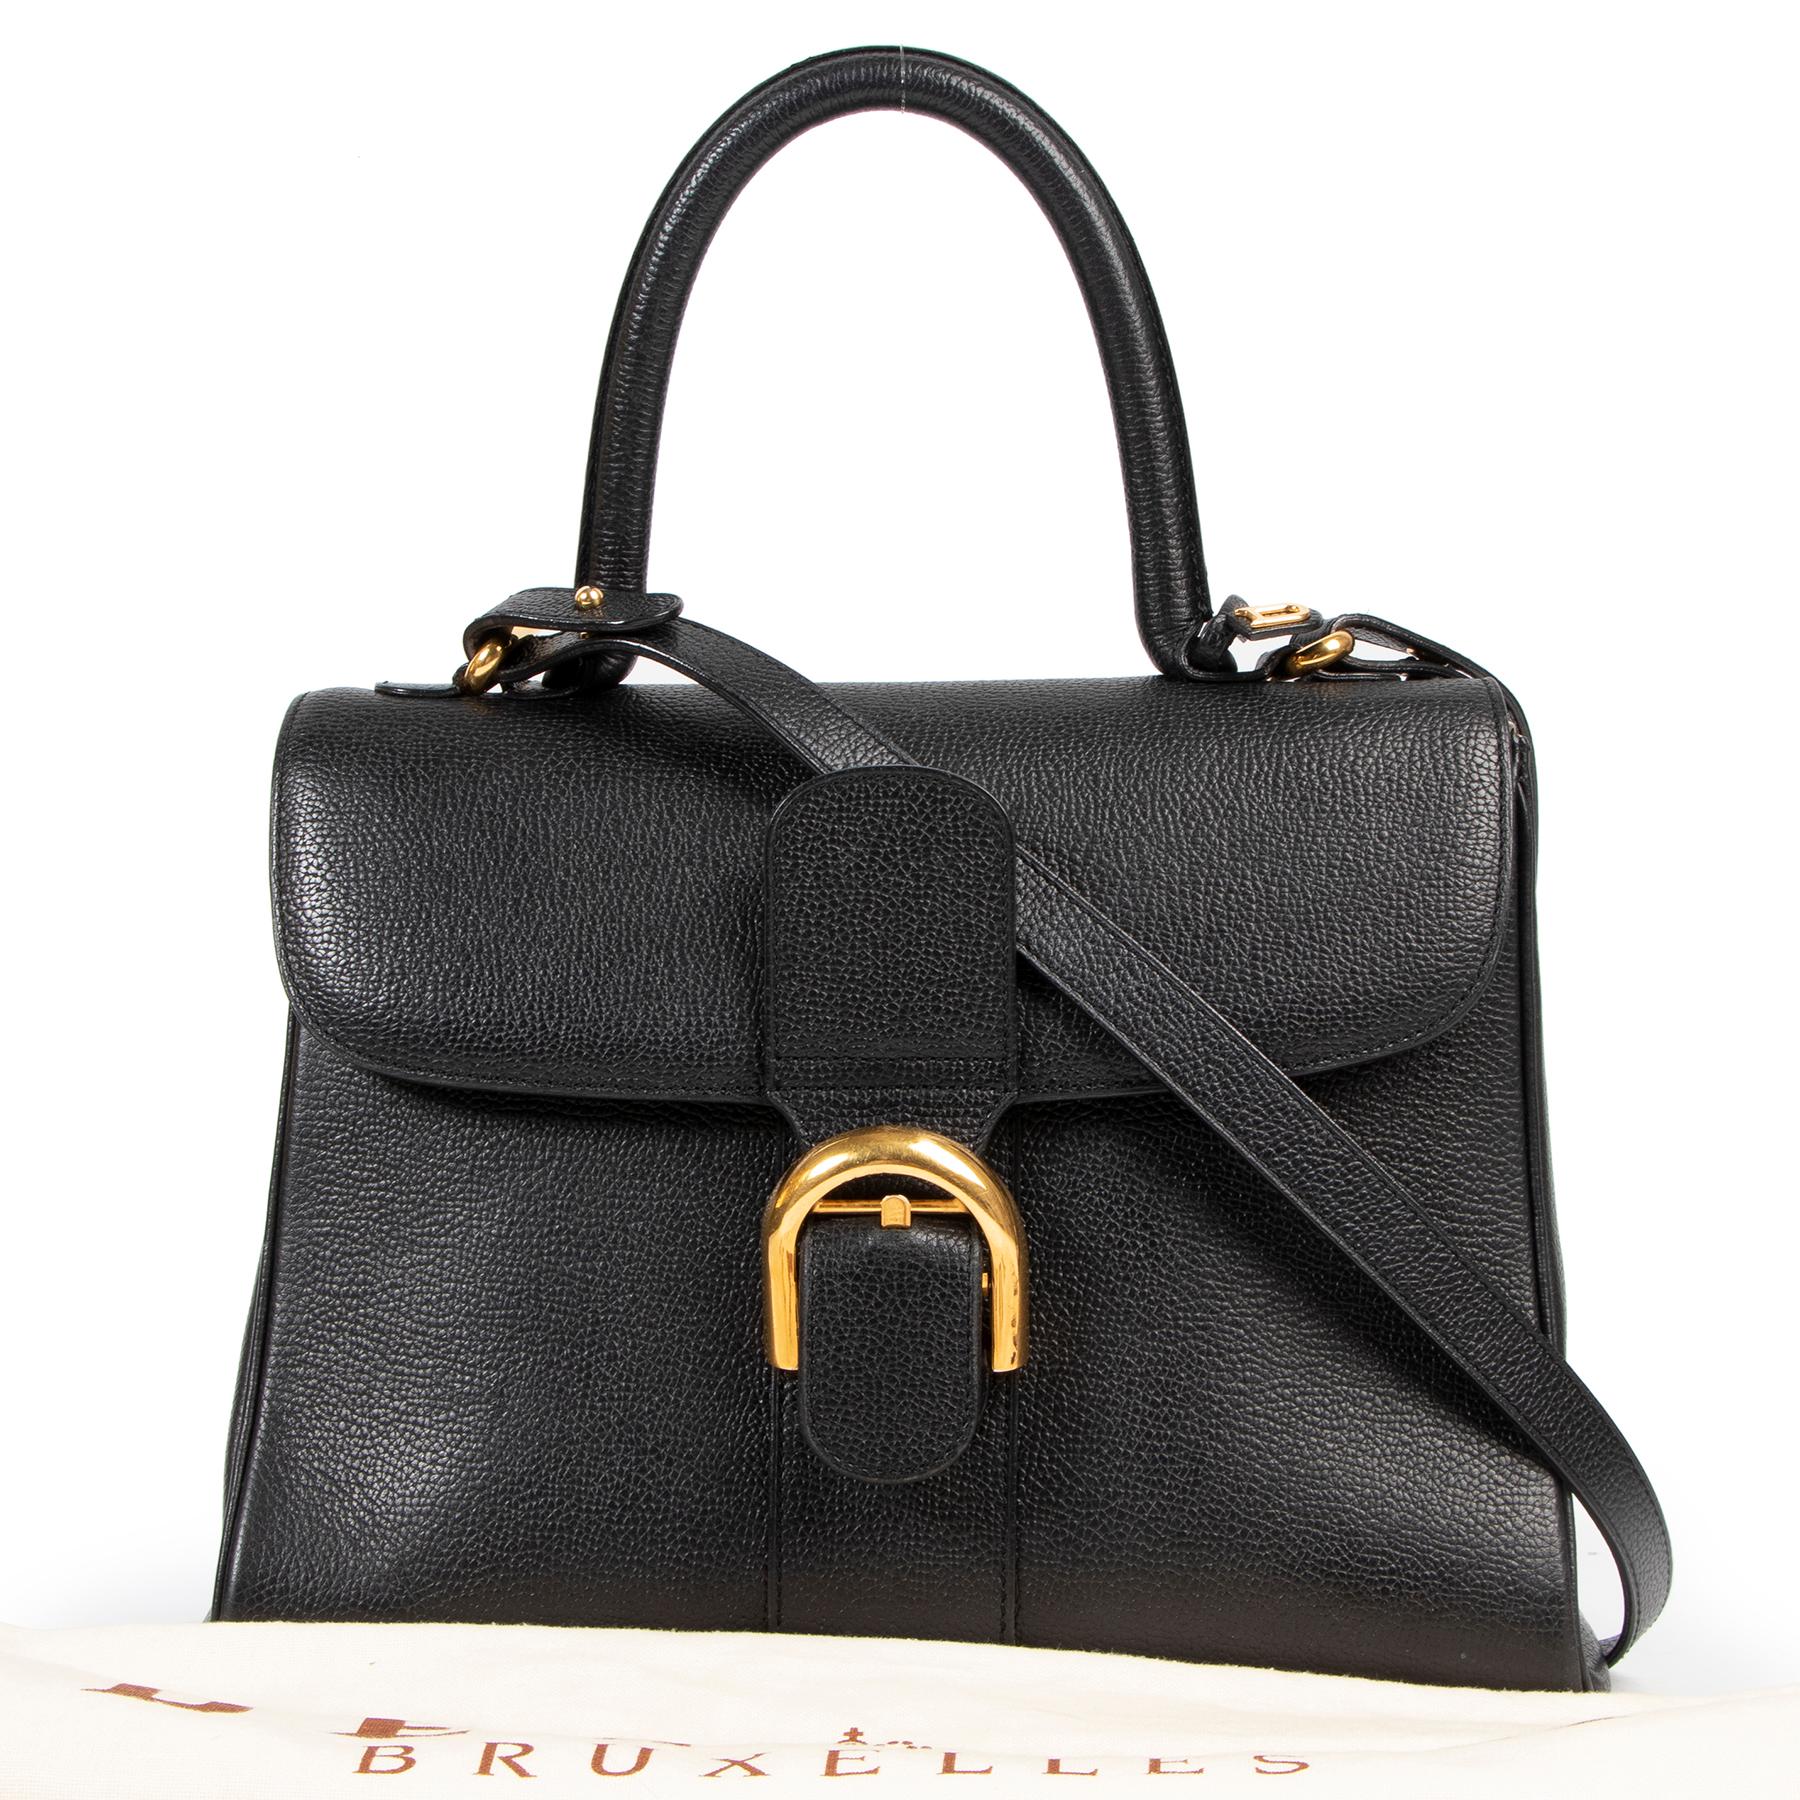 Very good condition

Delvaux Brillant Black MM + Strap

The iconic Delvaux Brillant in timeless black pebbled leather with gold toned hardare. The bag has a detachable shoulder strap and can be worn cross body.

The interior of this beauty features